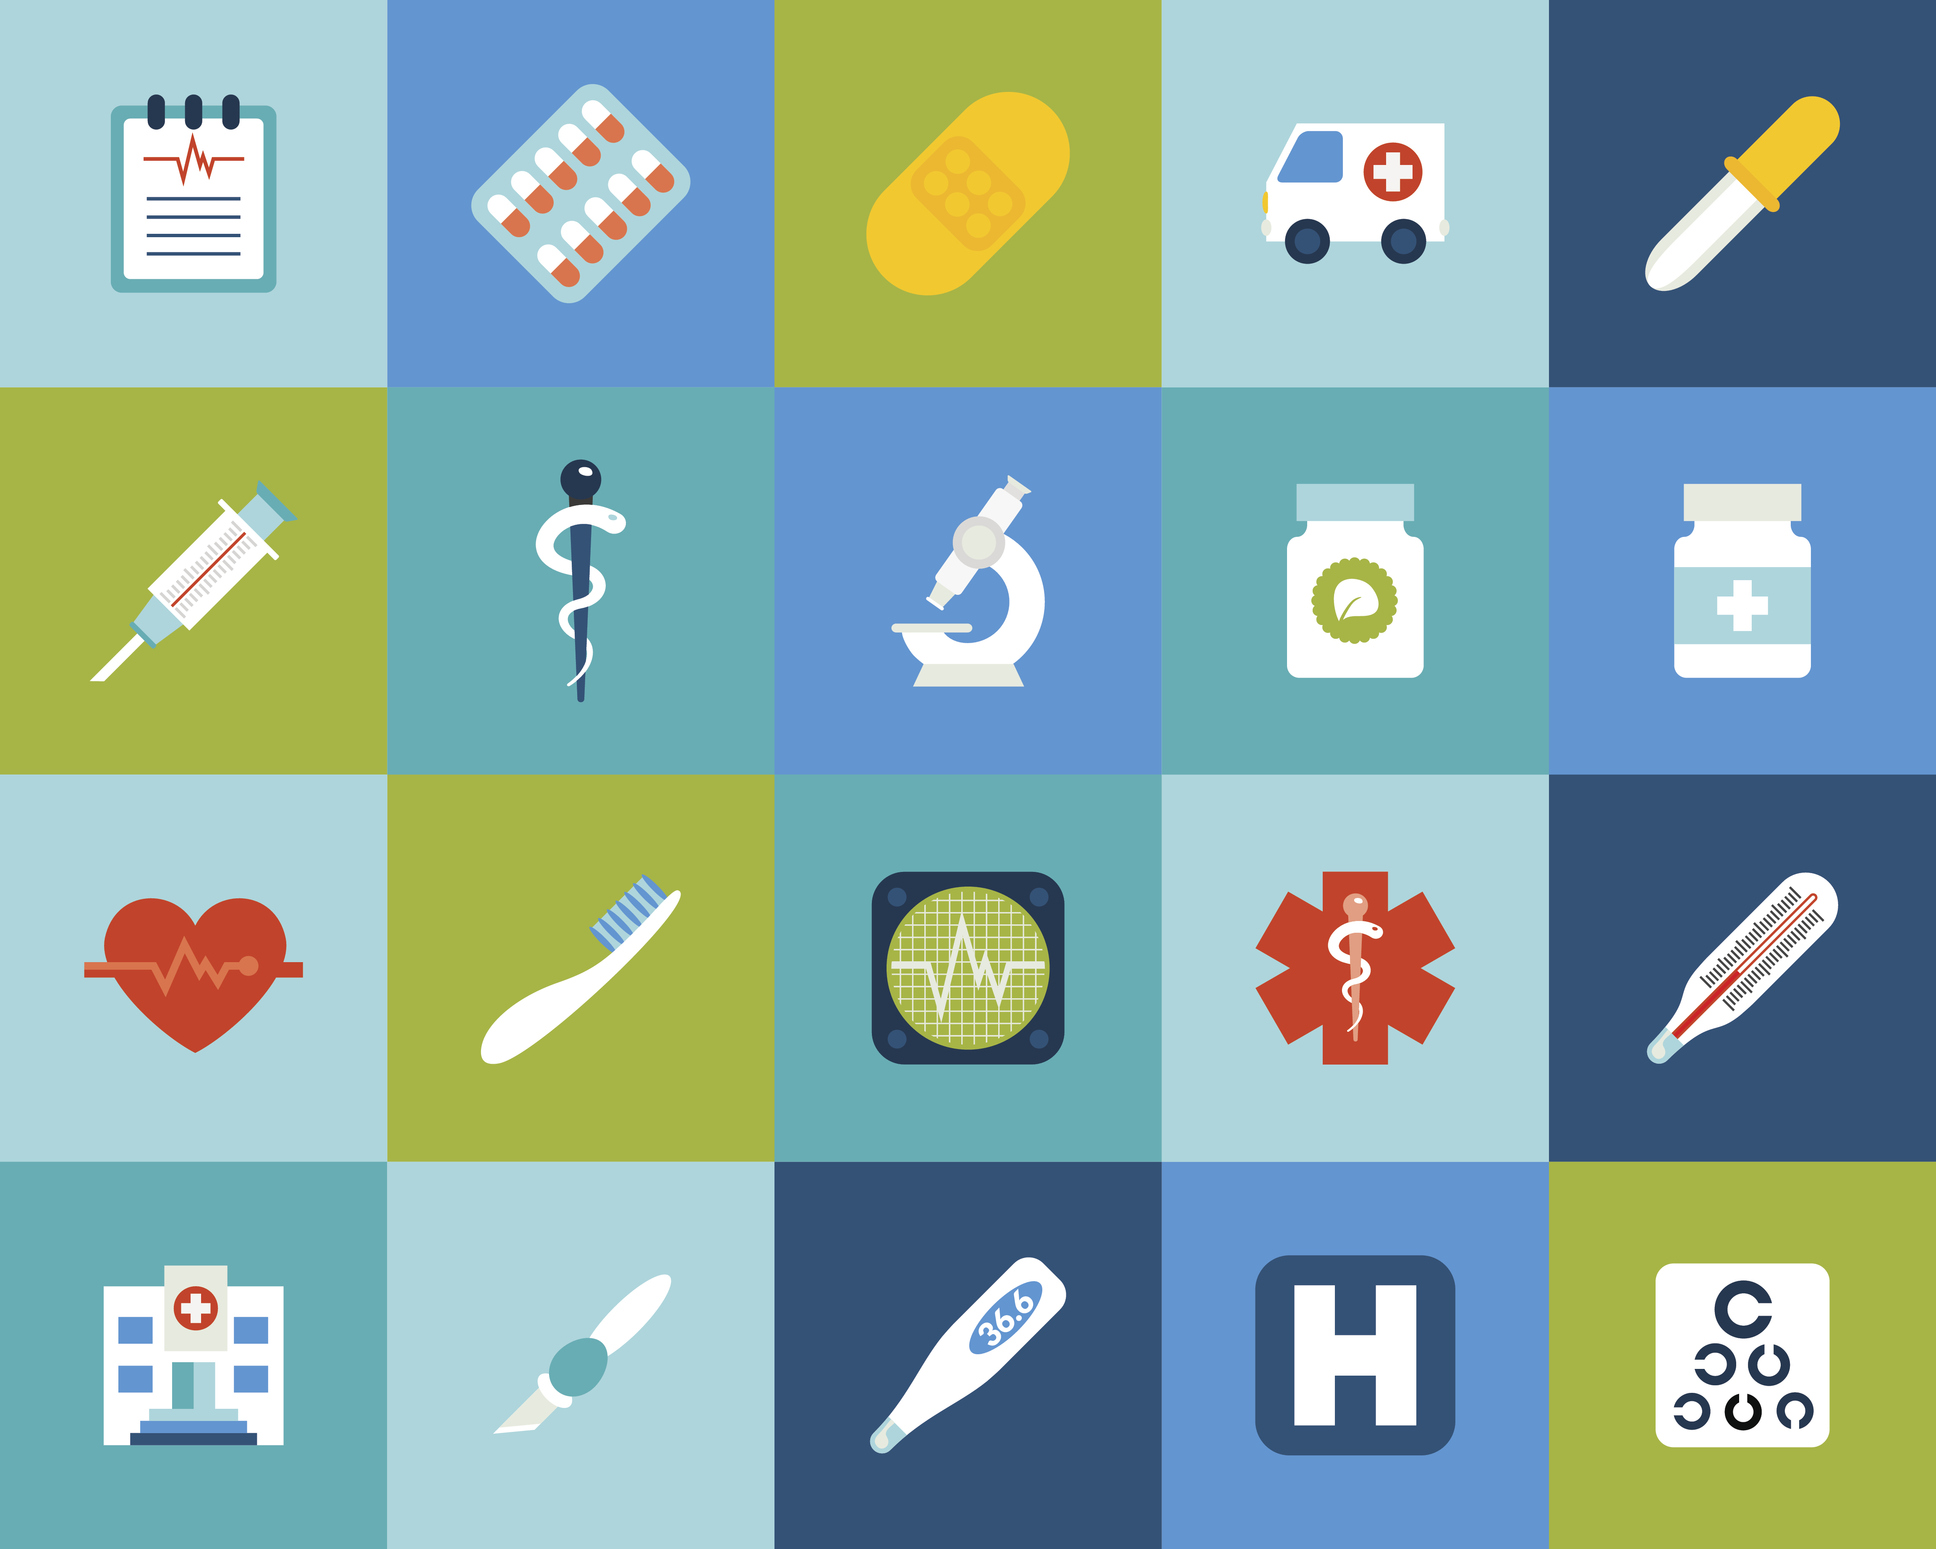 A grid of Medical icons such as hospital, thermometer, syringe etc